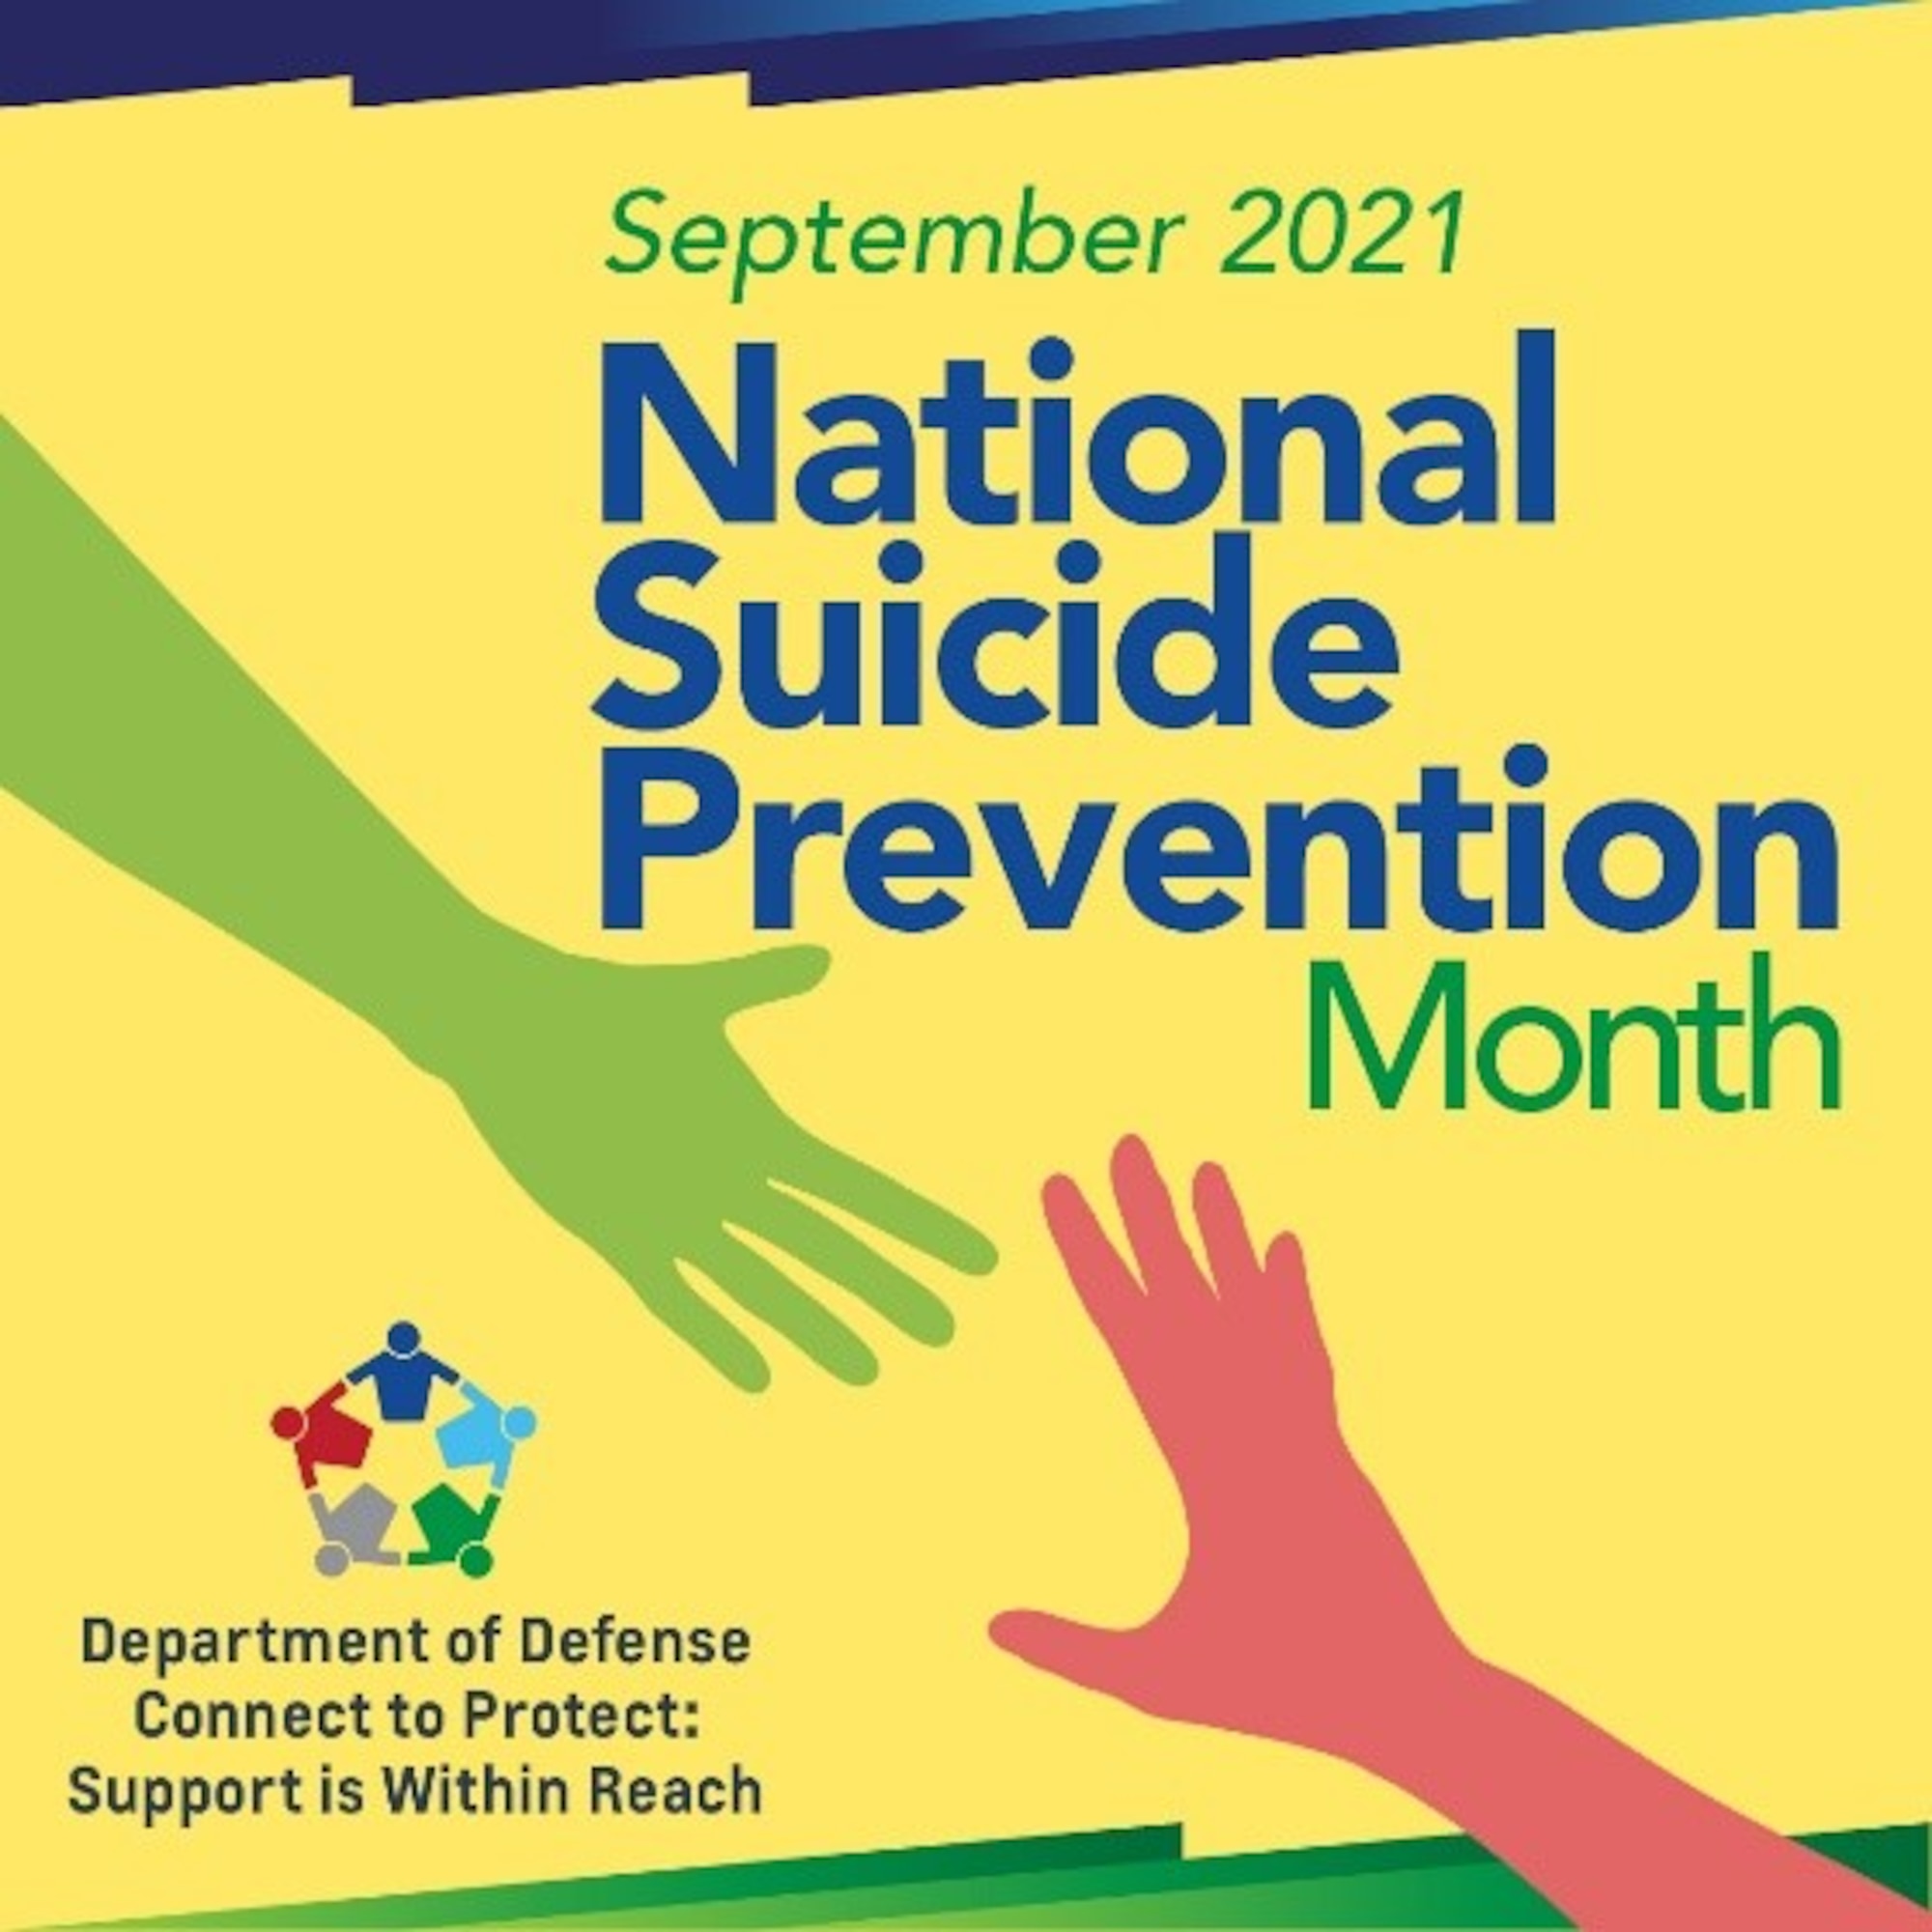 Depicted is a graphic and illustration highlighting National Suicide Awareness Prevention Month 2021. The 2021 slogan is : "Connect to Protect: Support is Within Reach."